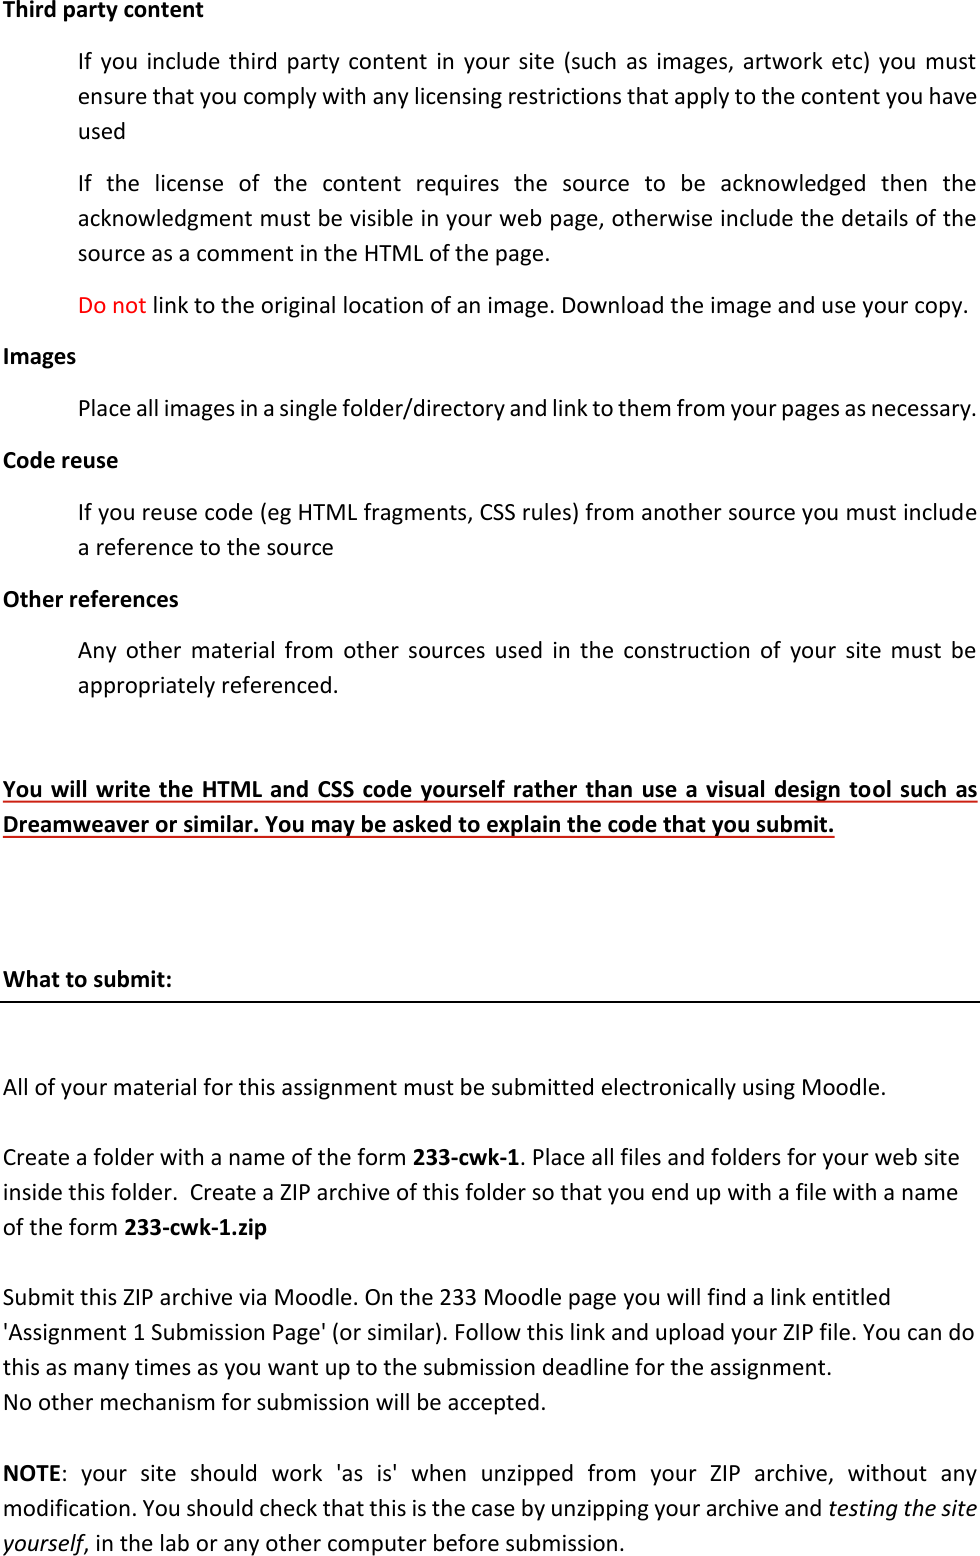 Page 4 of 4 - AS1 Guide